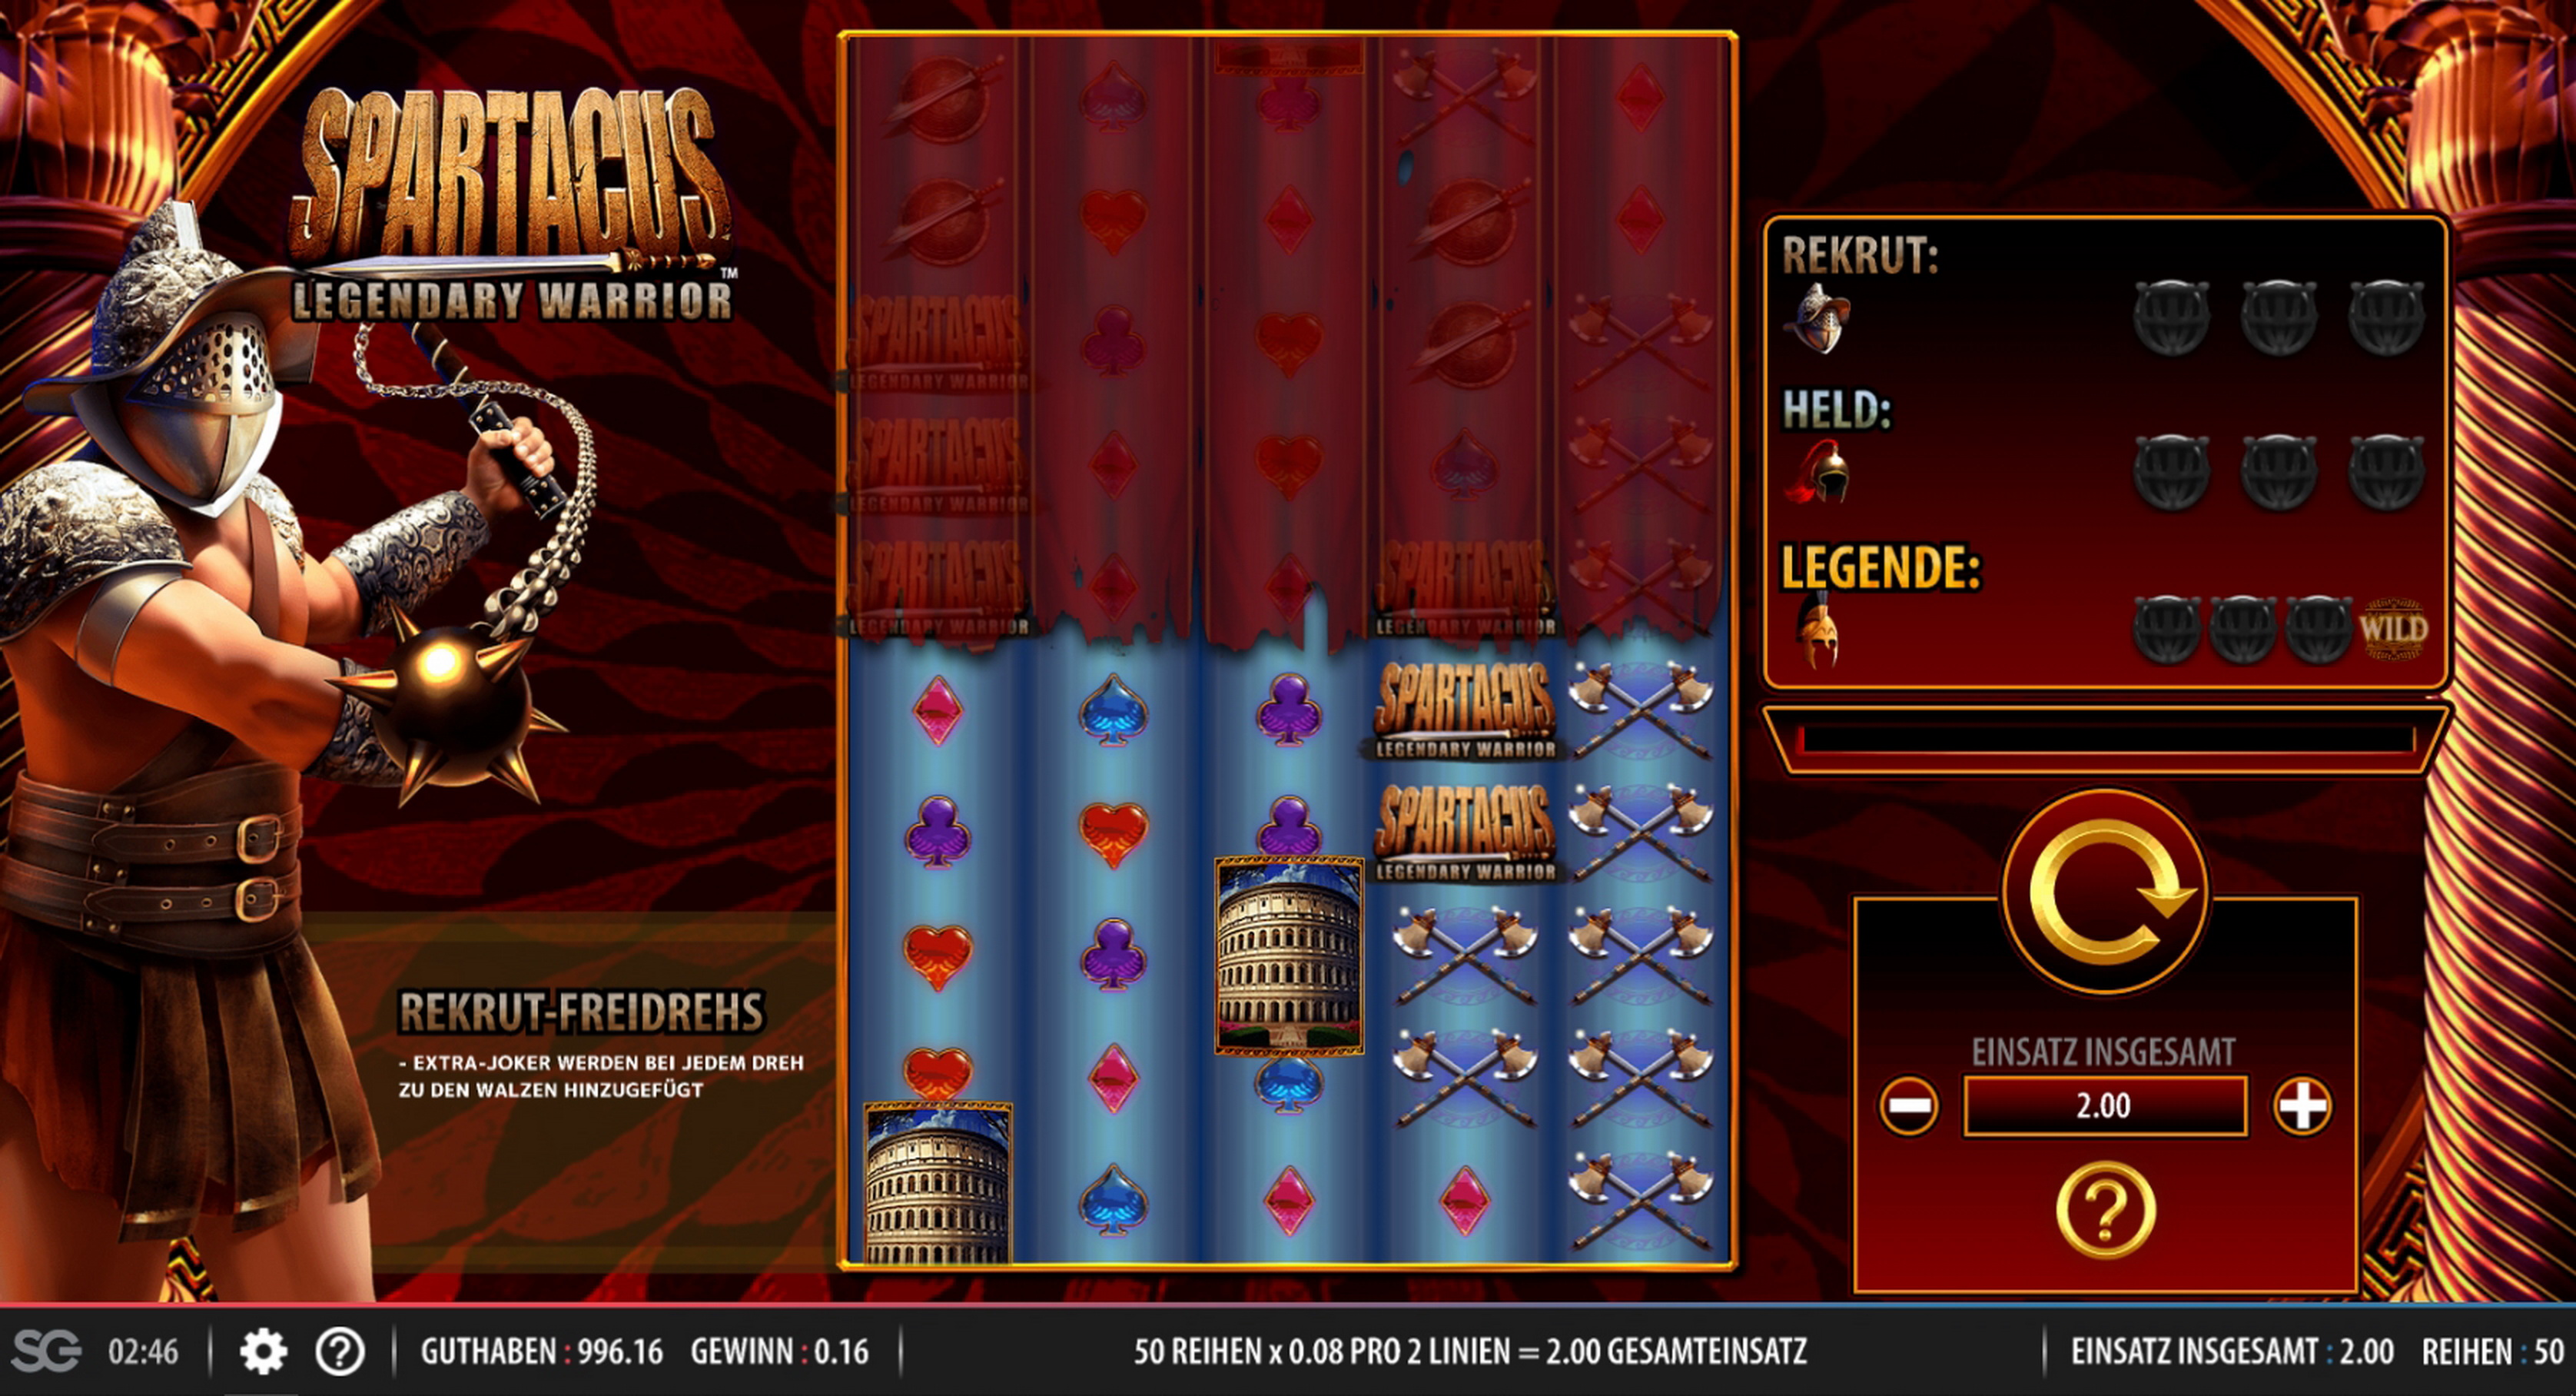 Win Money in Spartacus Legendary Warrior Free Slot Game by Red7 Mobile